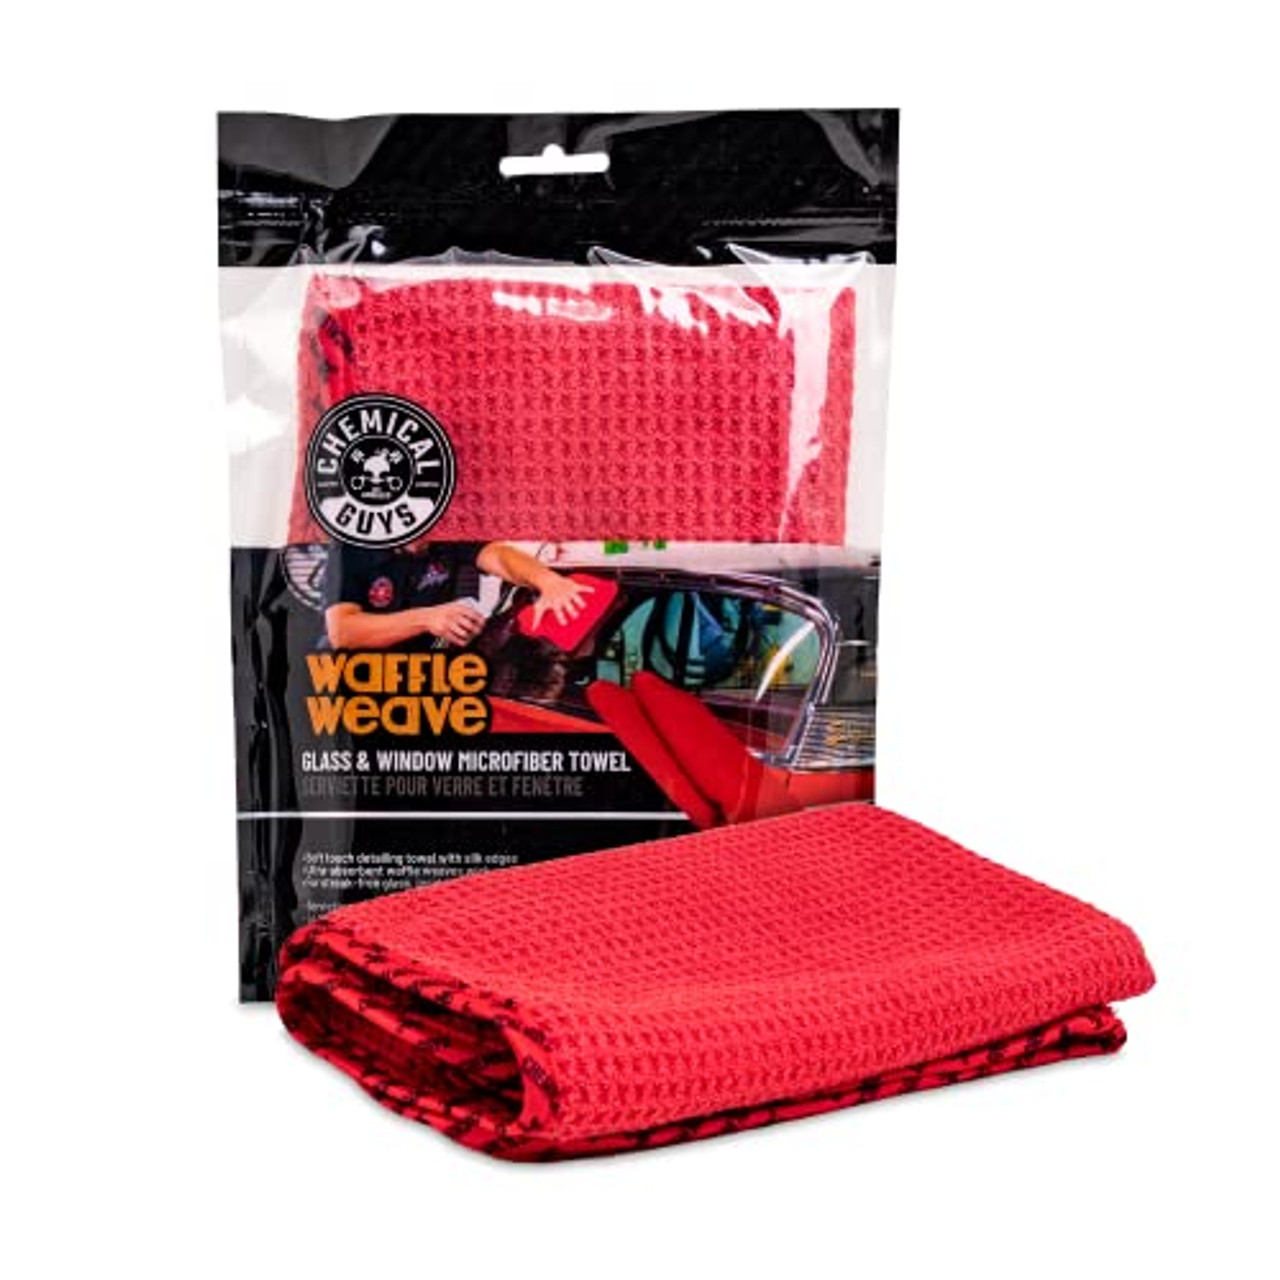 Chemical Guys WAC21316 - Cherry Wet Wax (16 oz) & Two Free towels